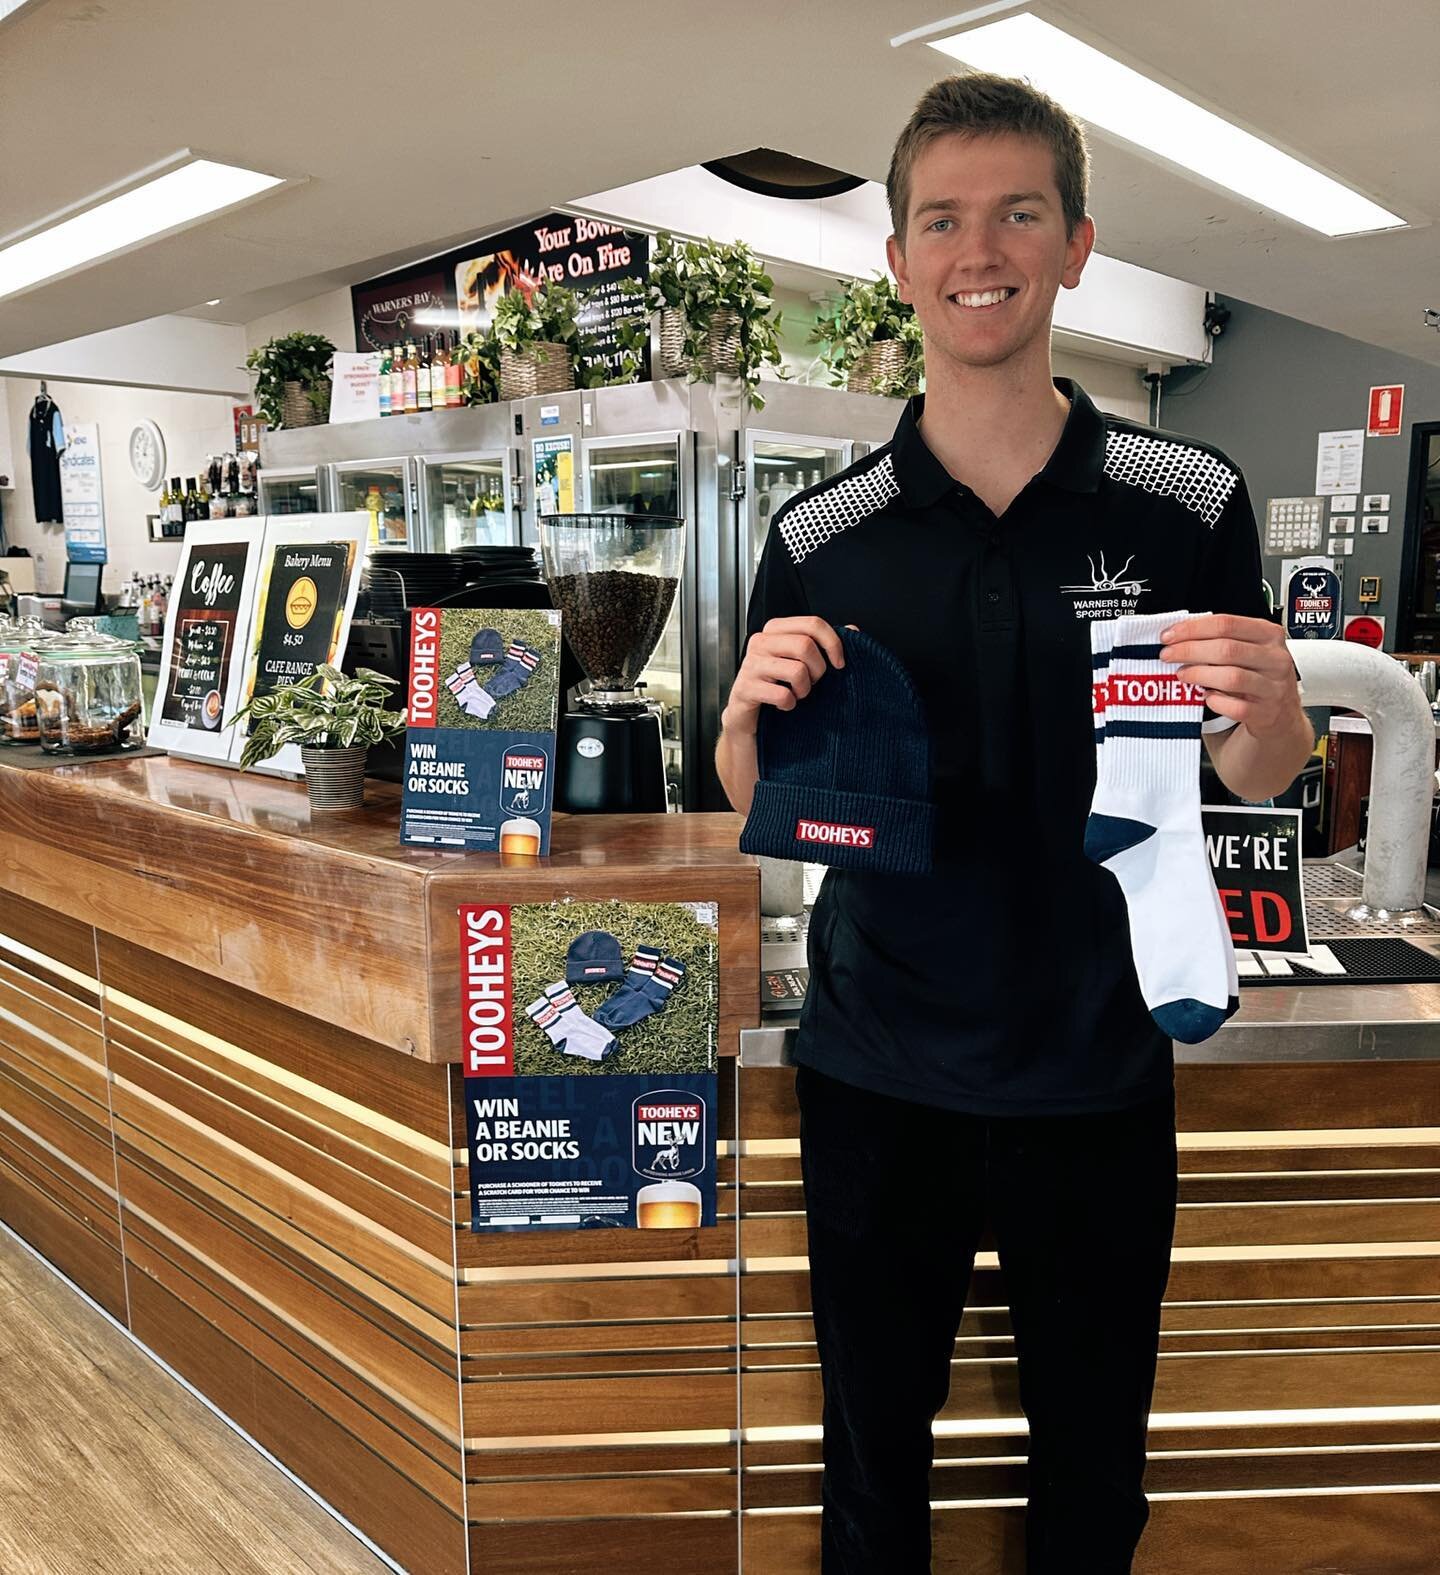 TOOHEYS NEW PROMO 🍻

Buy on tap Tooheys New or Tooheys Old for your chance to win a Beanie or socks! 🧦 @tooheys_au